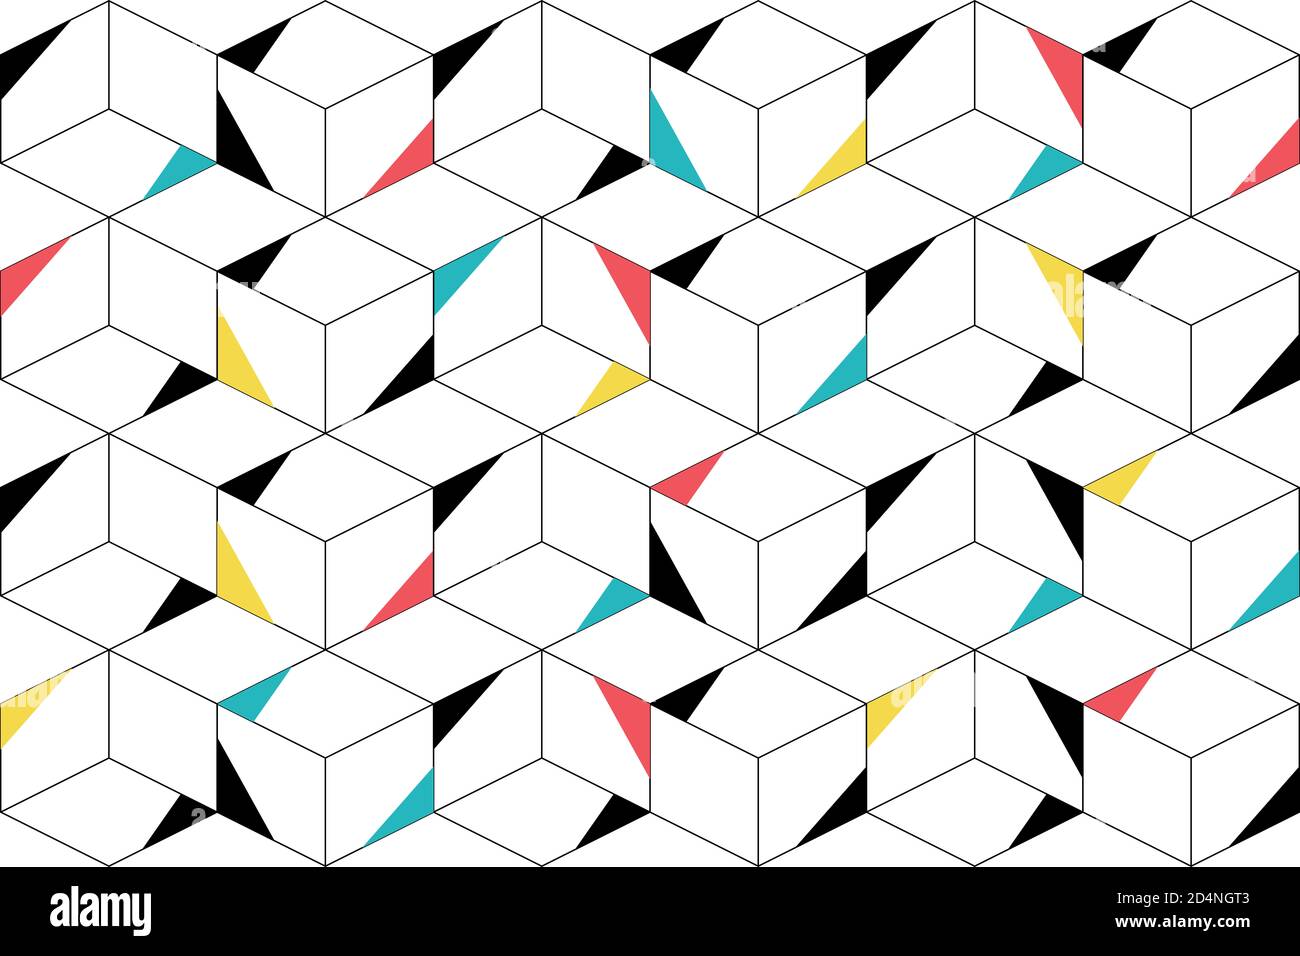 https://c8.alamy.com/comp/2D4NGT3/seamless-abstract-background-pattern-made-with-lines-forming-cubes-and-colorful-triangles-modern-playful-fun-vector-art-2D4NGT3.jpg